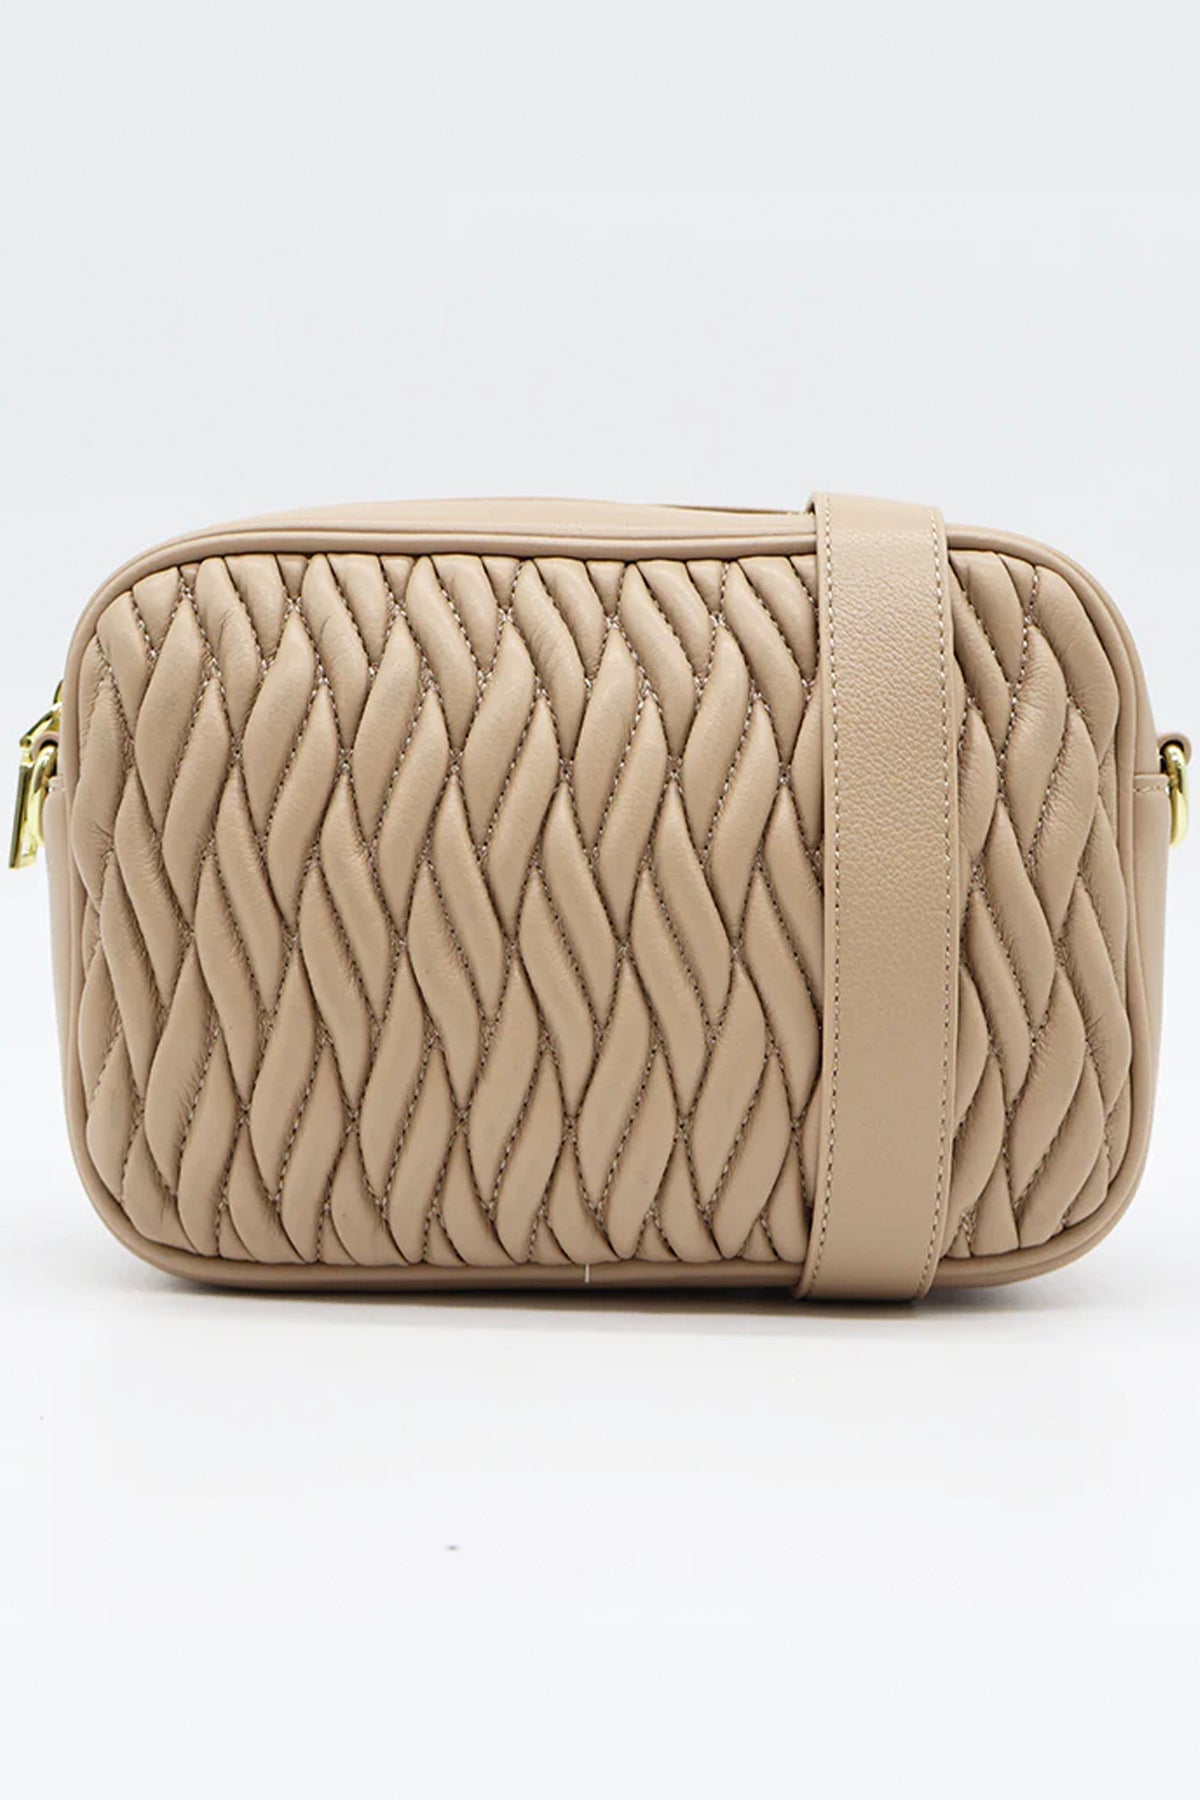 Ruby Rouche Cross Body Bag Nude